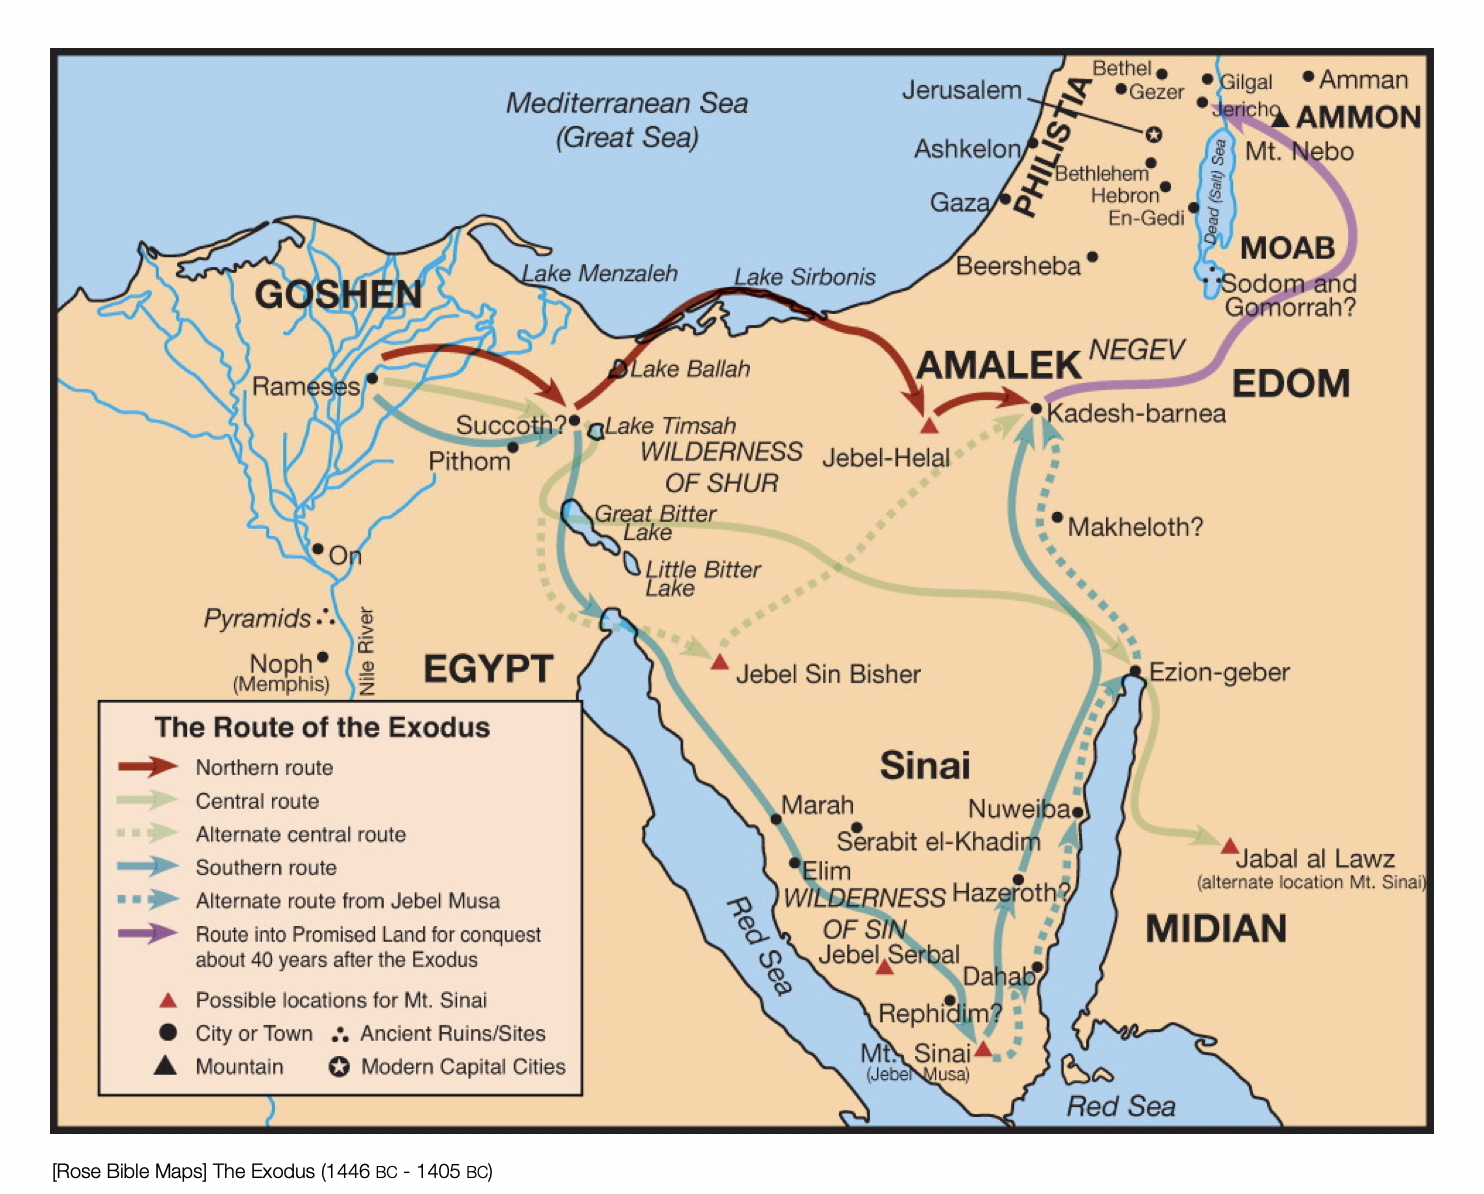 Possible routes of the Exodus according to the Rose Bible Guide.